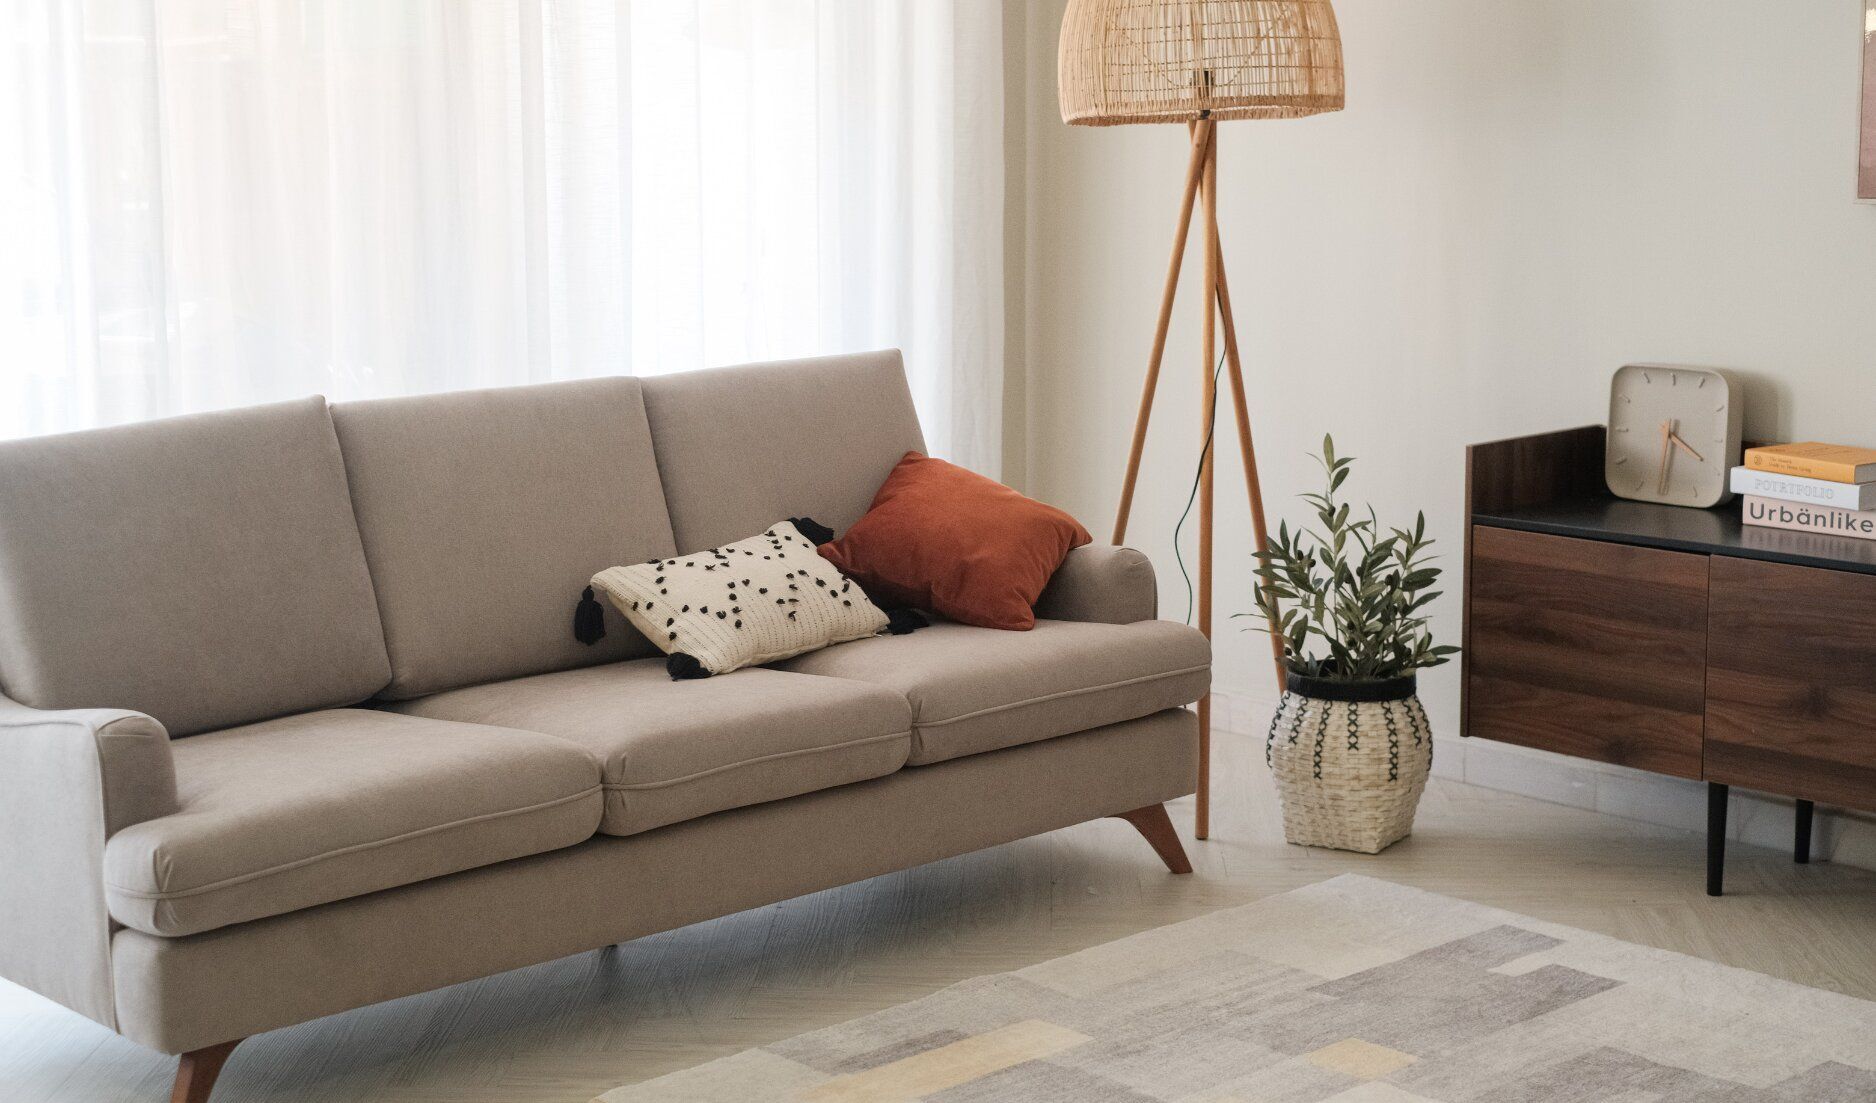 The Humble 3-Seater Sofa In Your Home